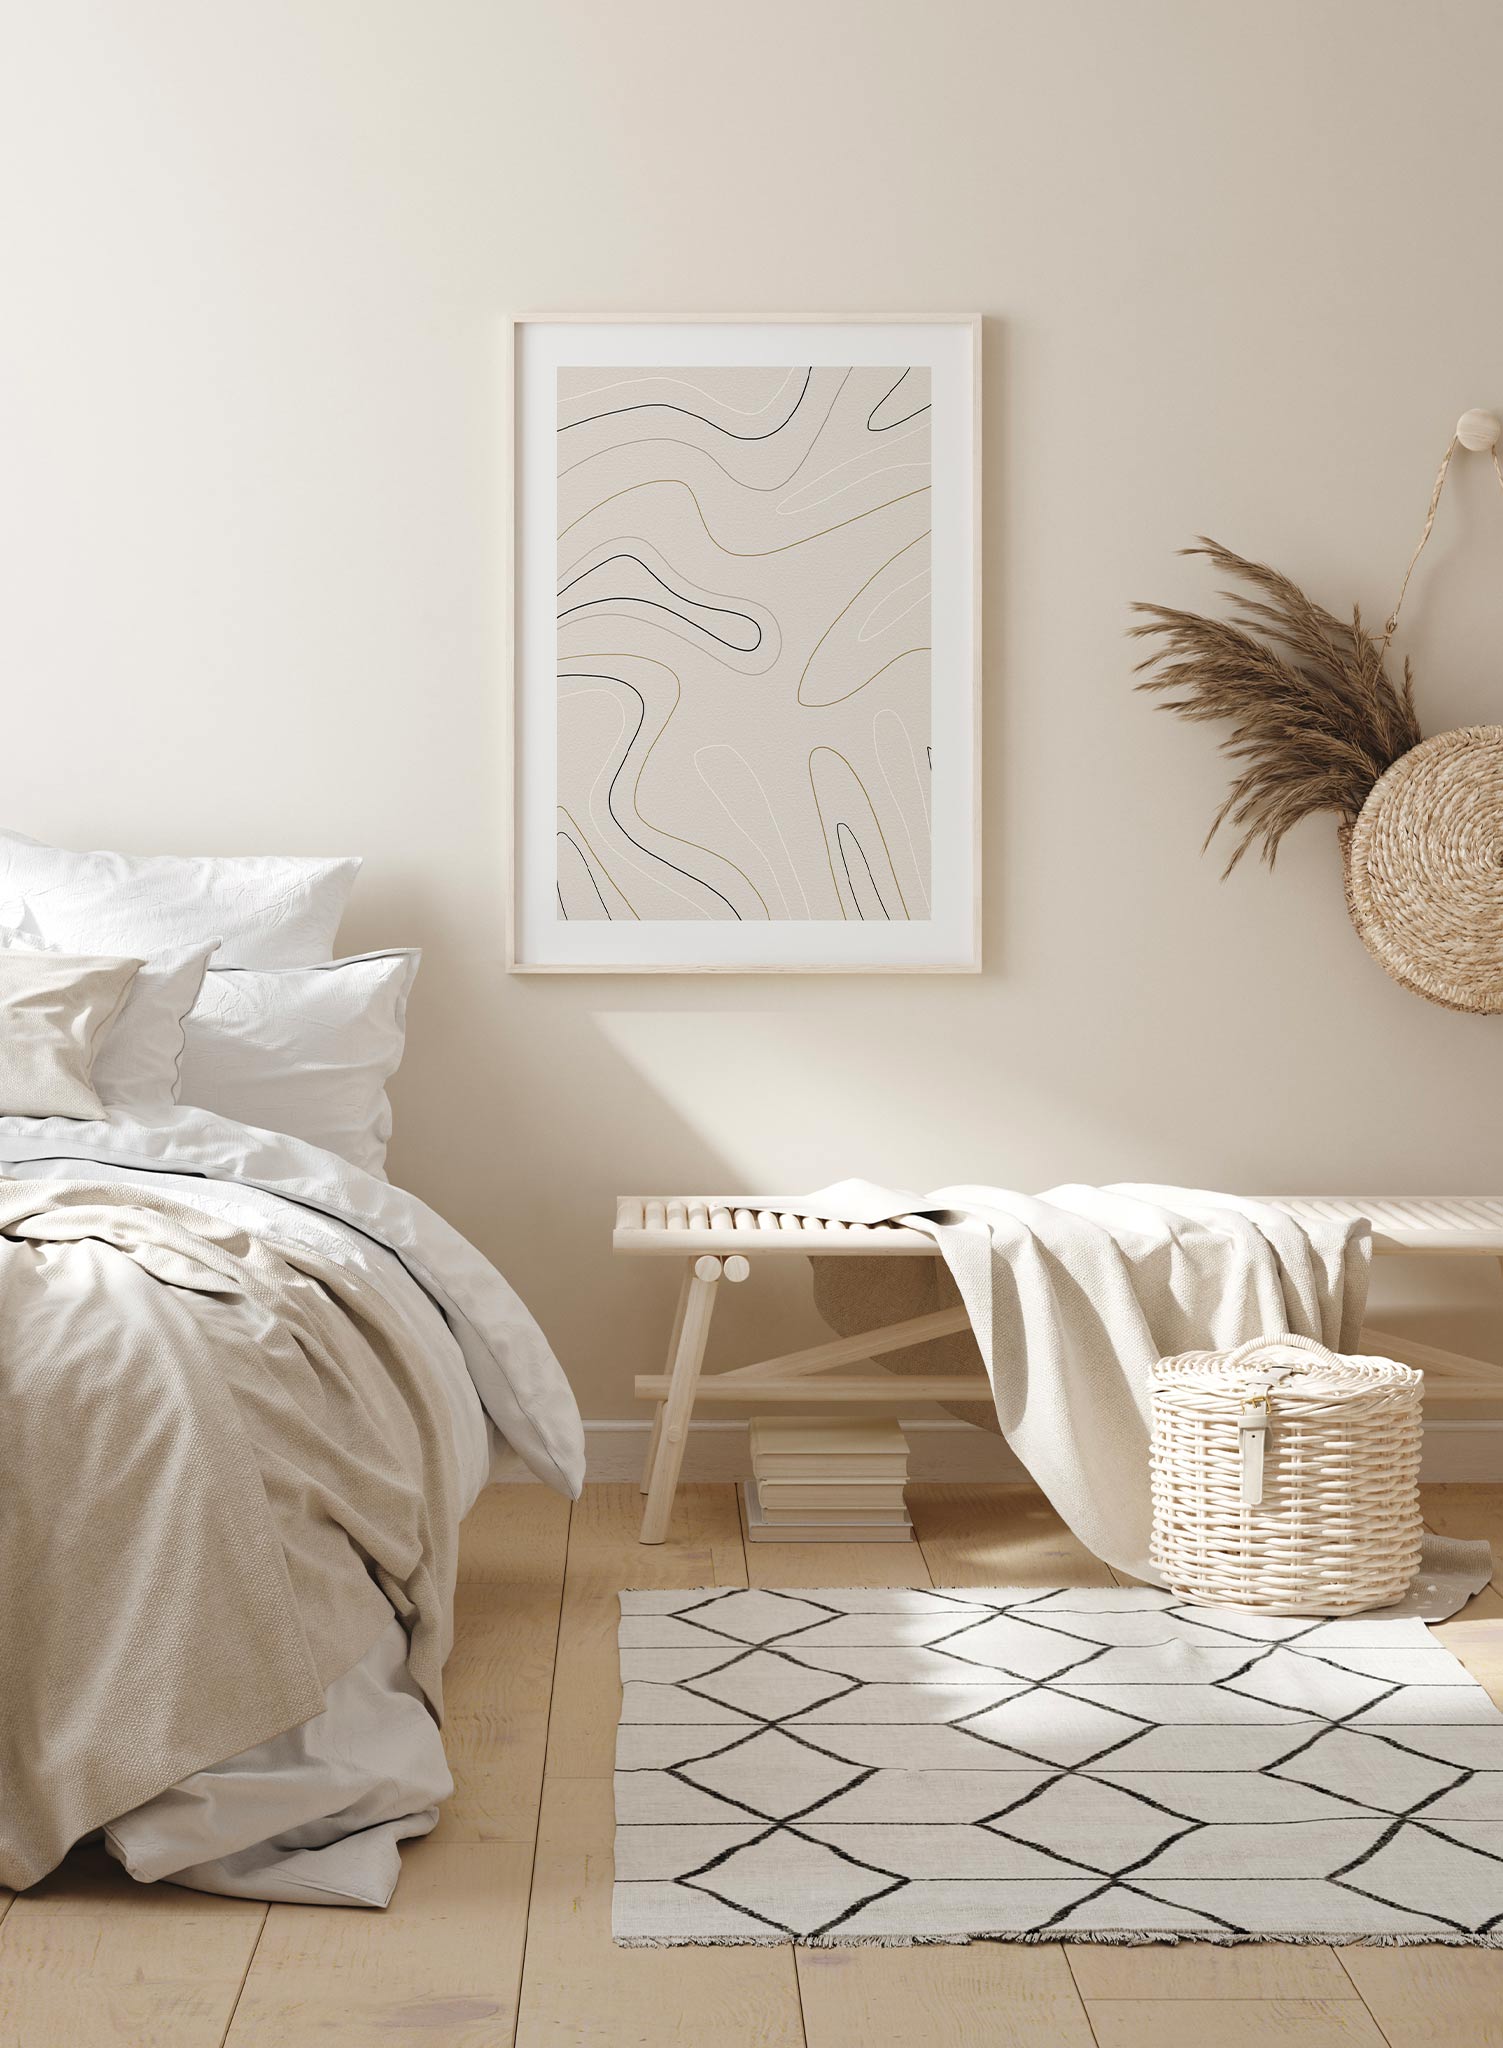 Buff Stream is a minimalist abstract illustration of curved monochrome lines by Opposite Wall.